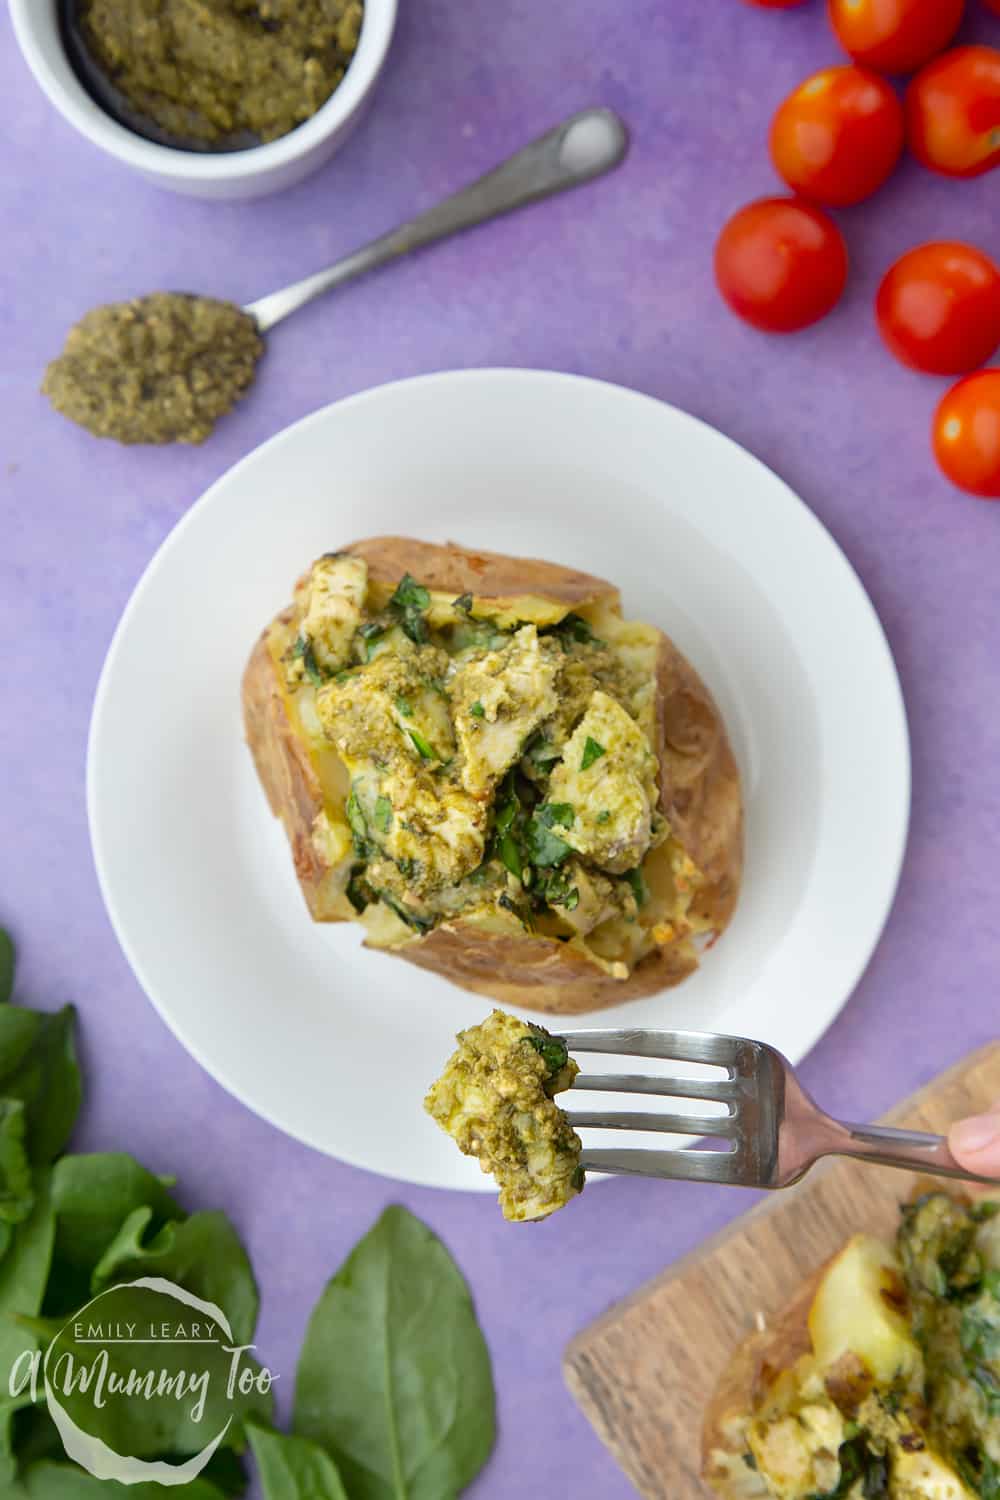 Jacket potato with cheesy pesto chicken on a white plate. The potato is piled high with a pesto, spinach cheese and chicken mix. A fork takes a bite.